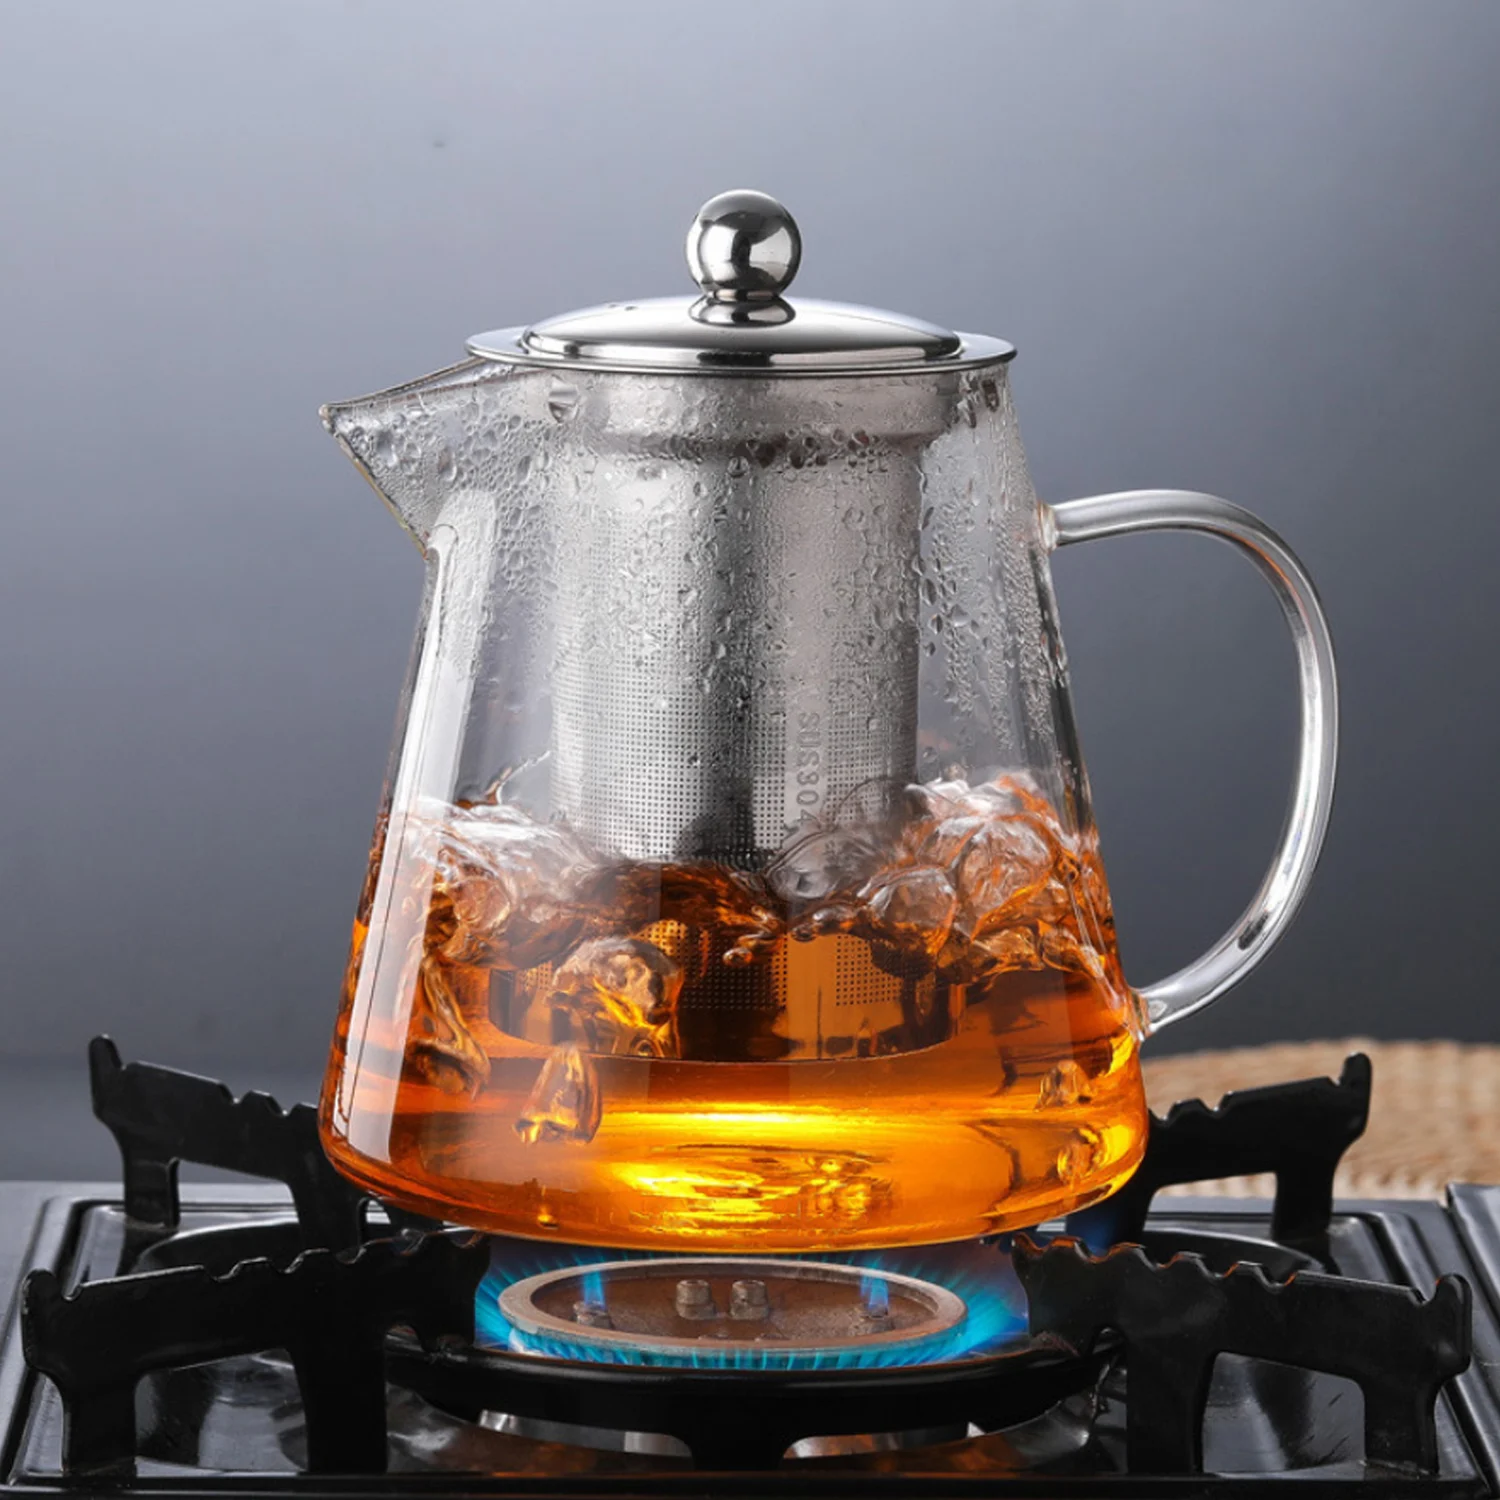 

450ml/550ml/750ml/950ml/1350ml Clear Glass Teapot High Temperature Resistant Loose Leaf Flower Tea Pot Maker Brewer with Straine